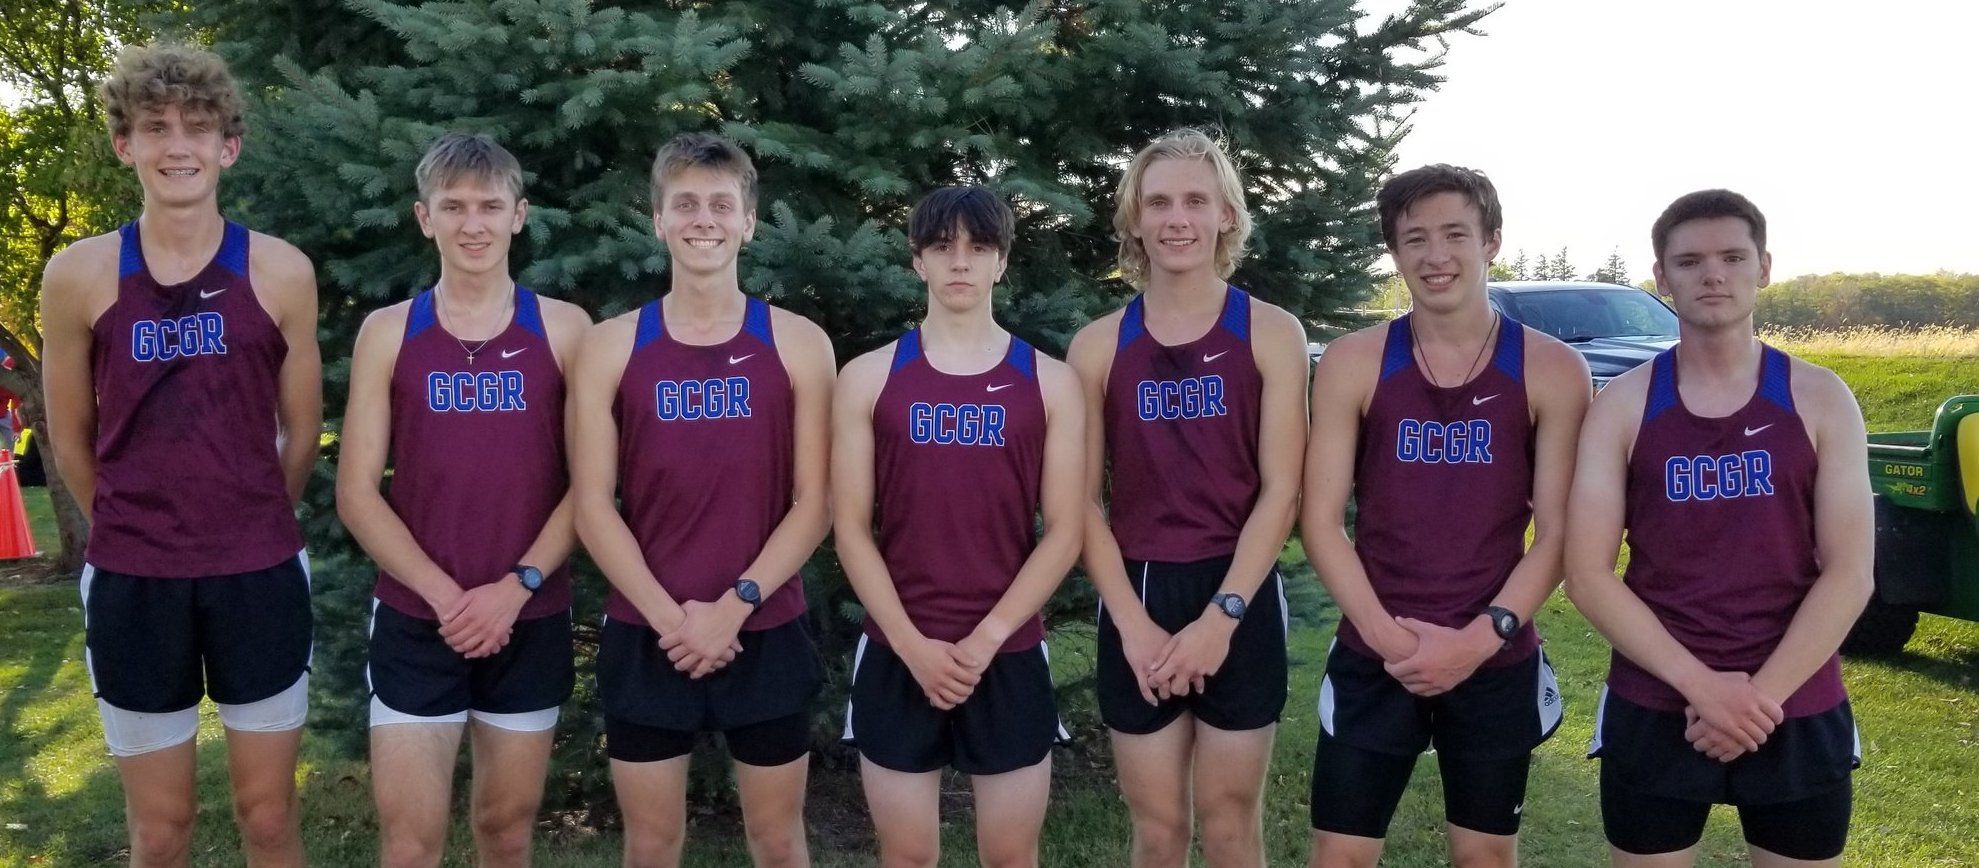 The Grundy Center/Gladbrook-Reinbeck boys cross country team made another appearance at the state meet in Fort Dodge in 2021. (Jake Ryder photo)